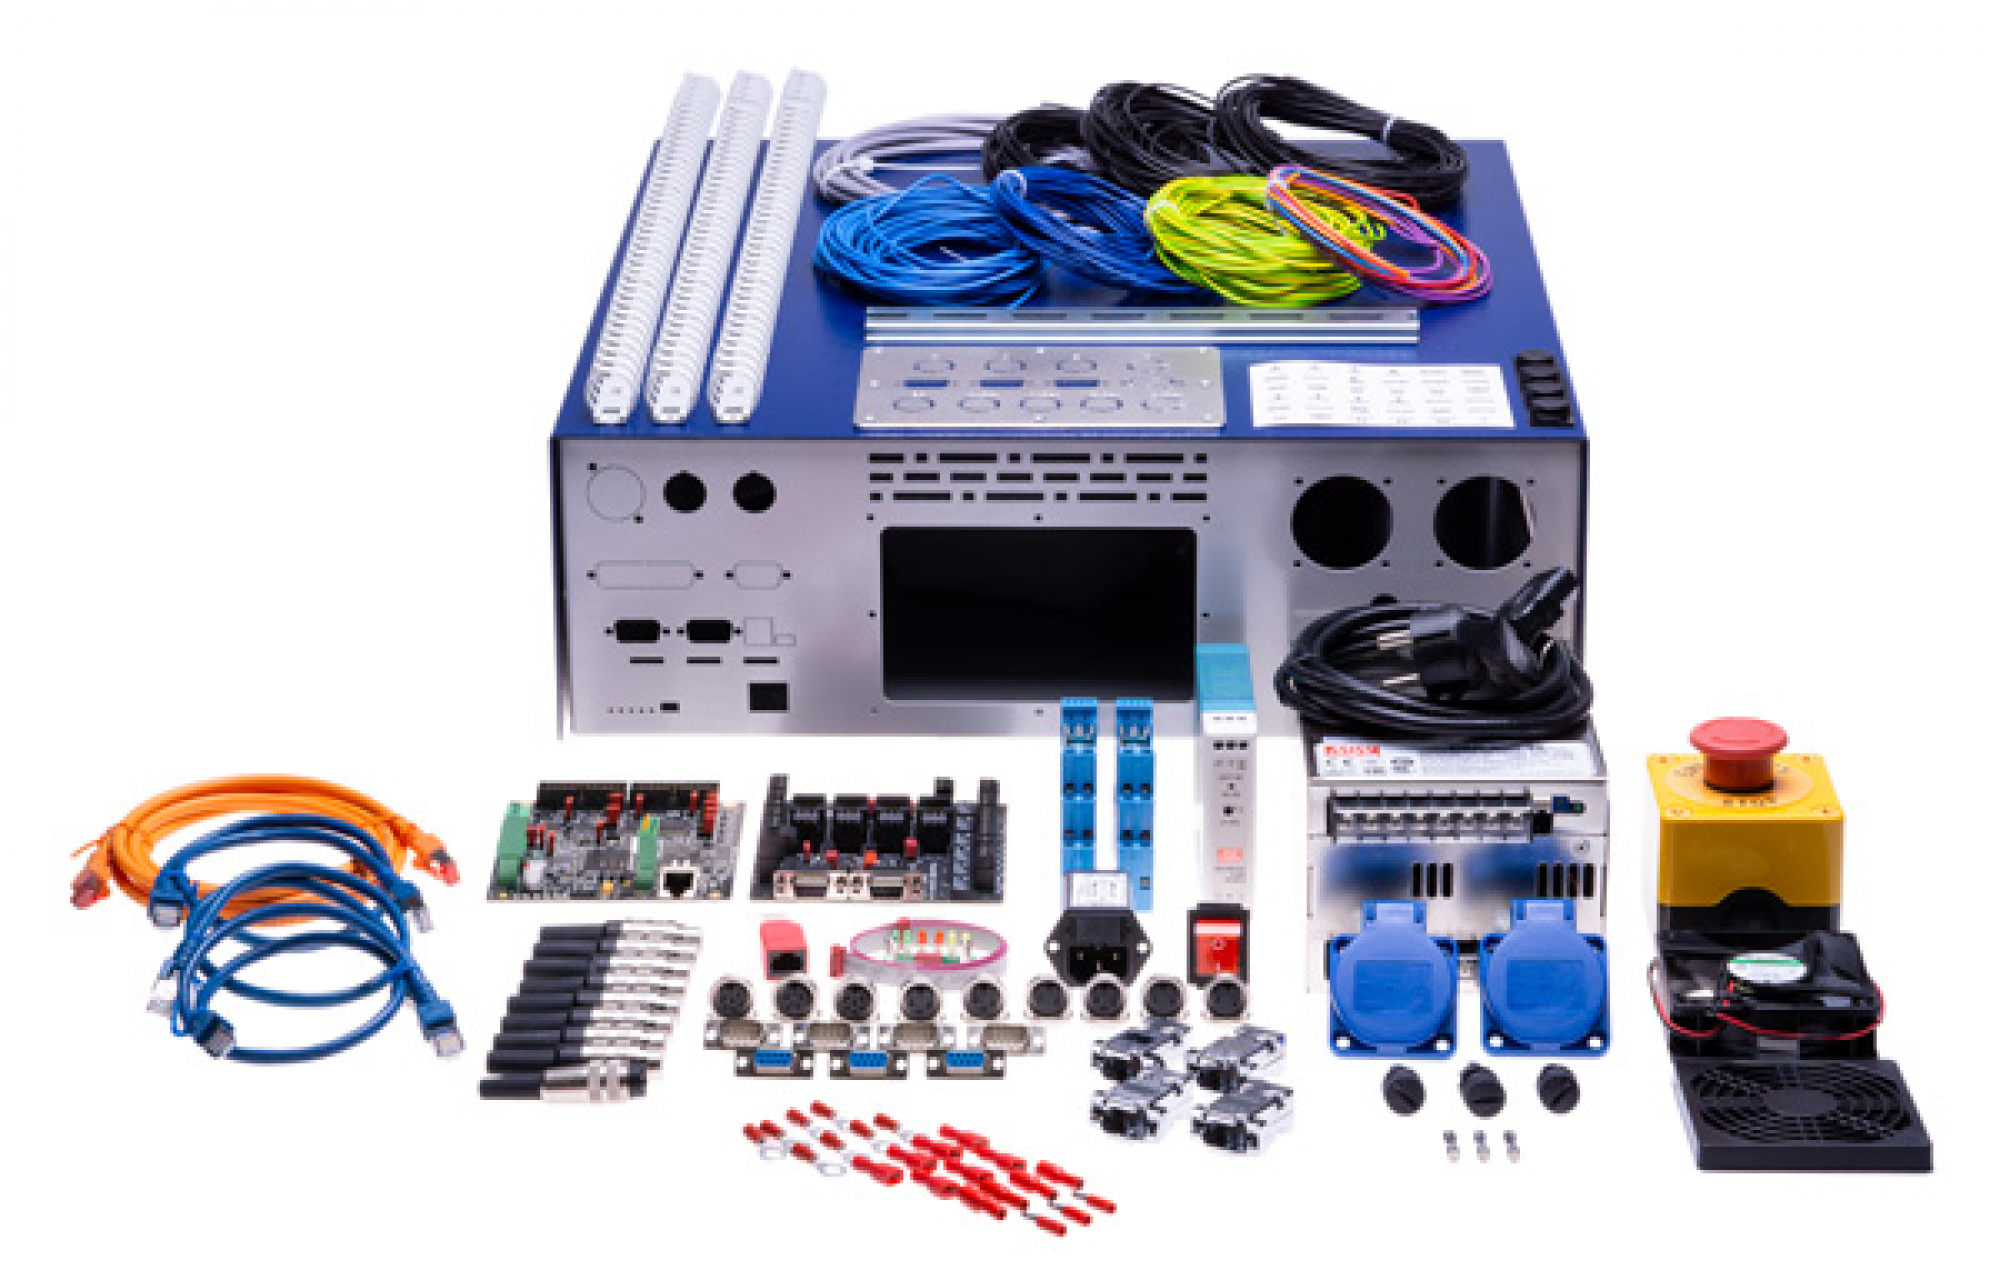 PRO-Control ITG - EDING CNC 720 - DIY-Kit for motors with integrated drivers - 3 axis